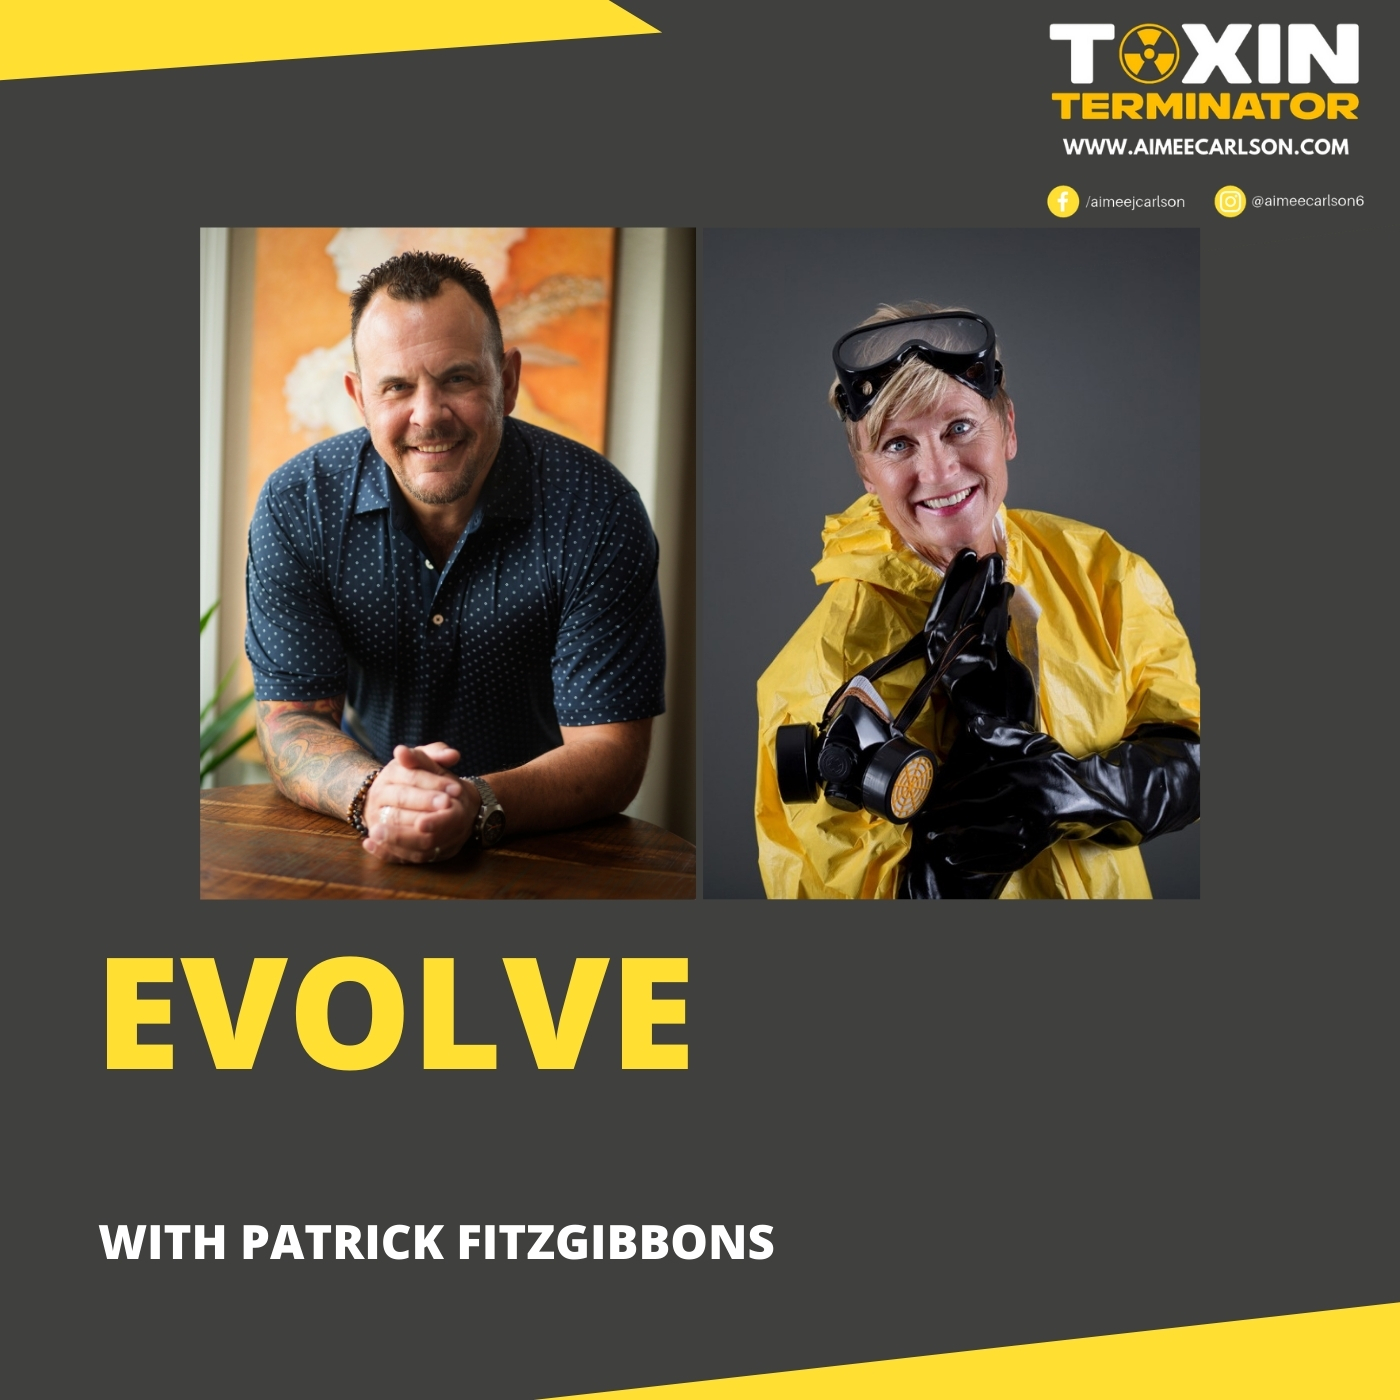 EVOLVE with Patrick Fitzgibbons